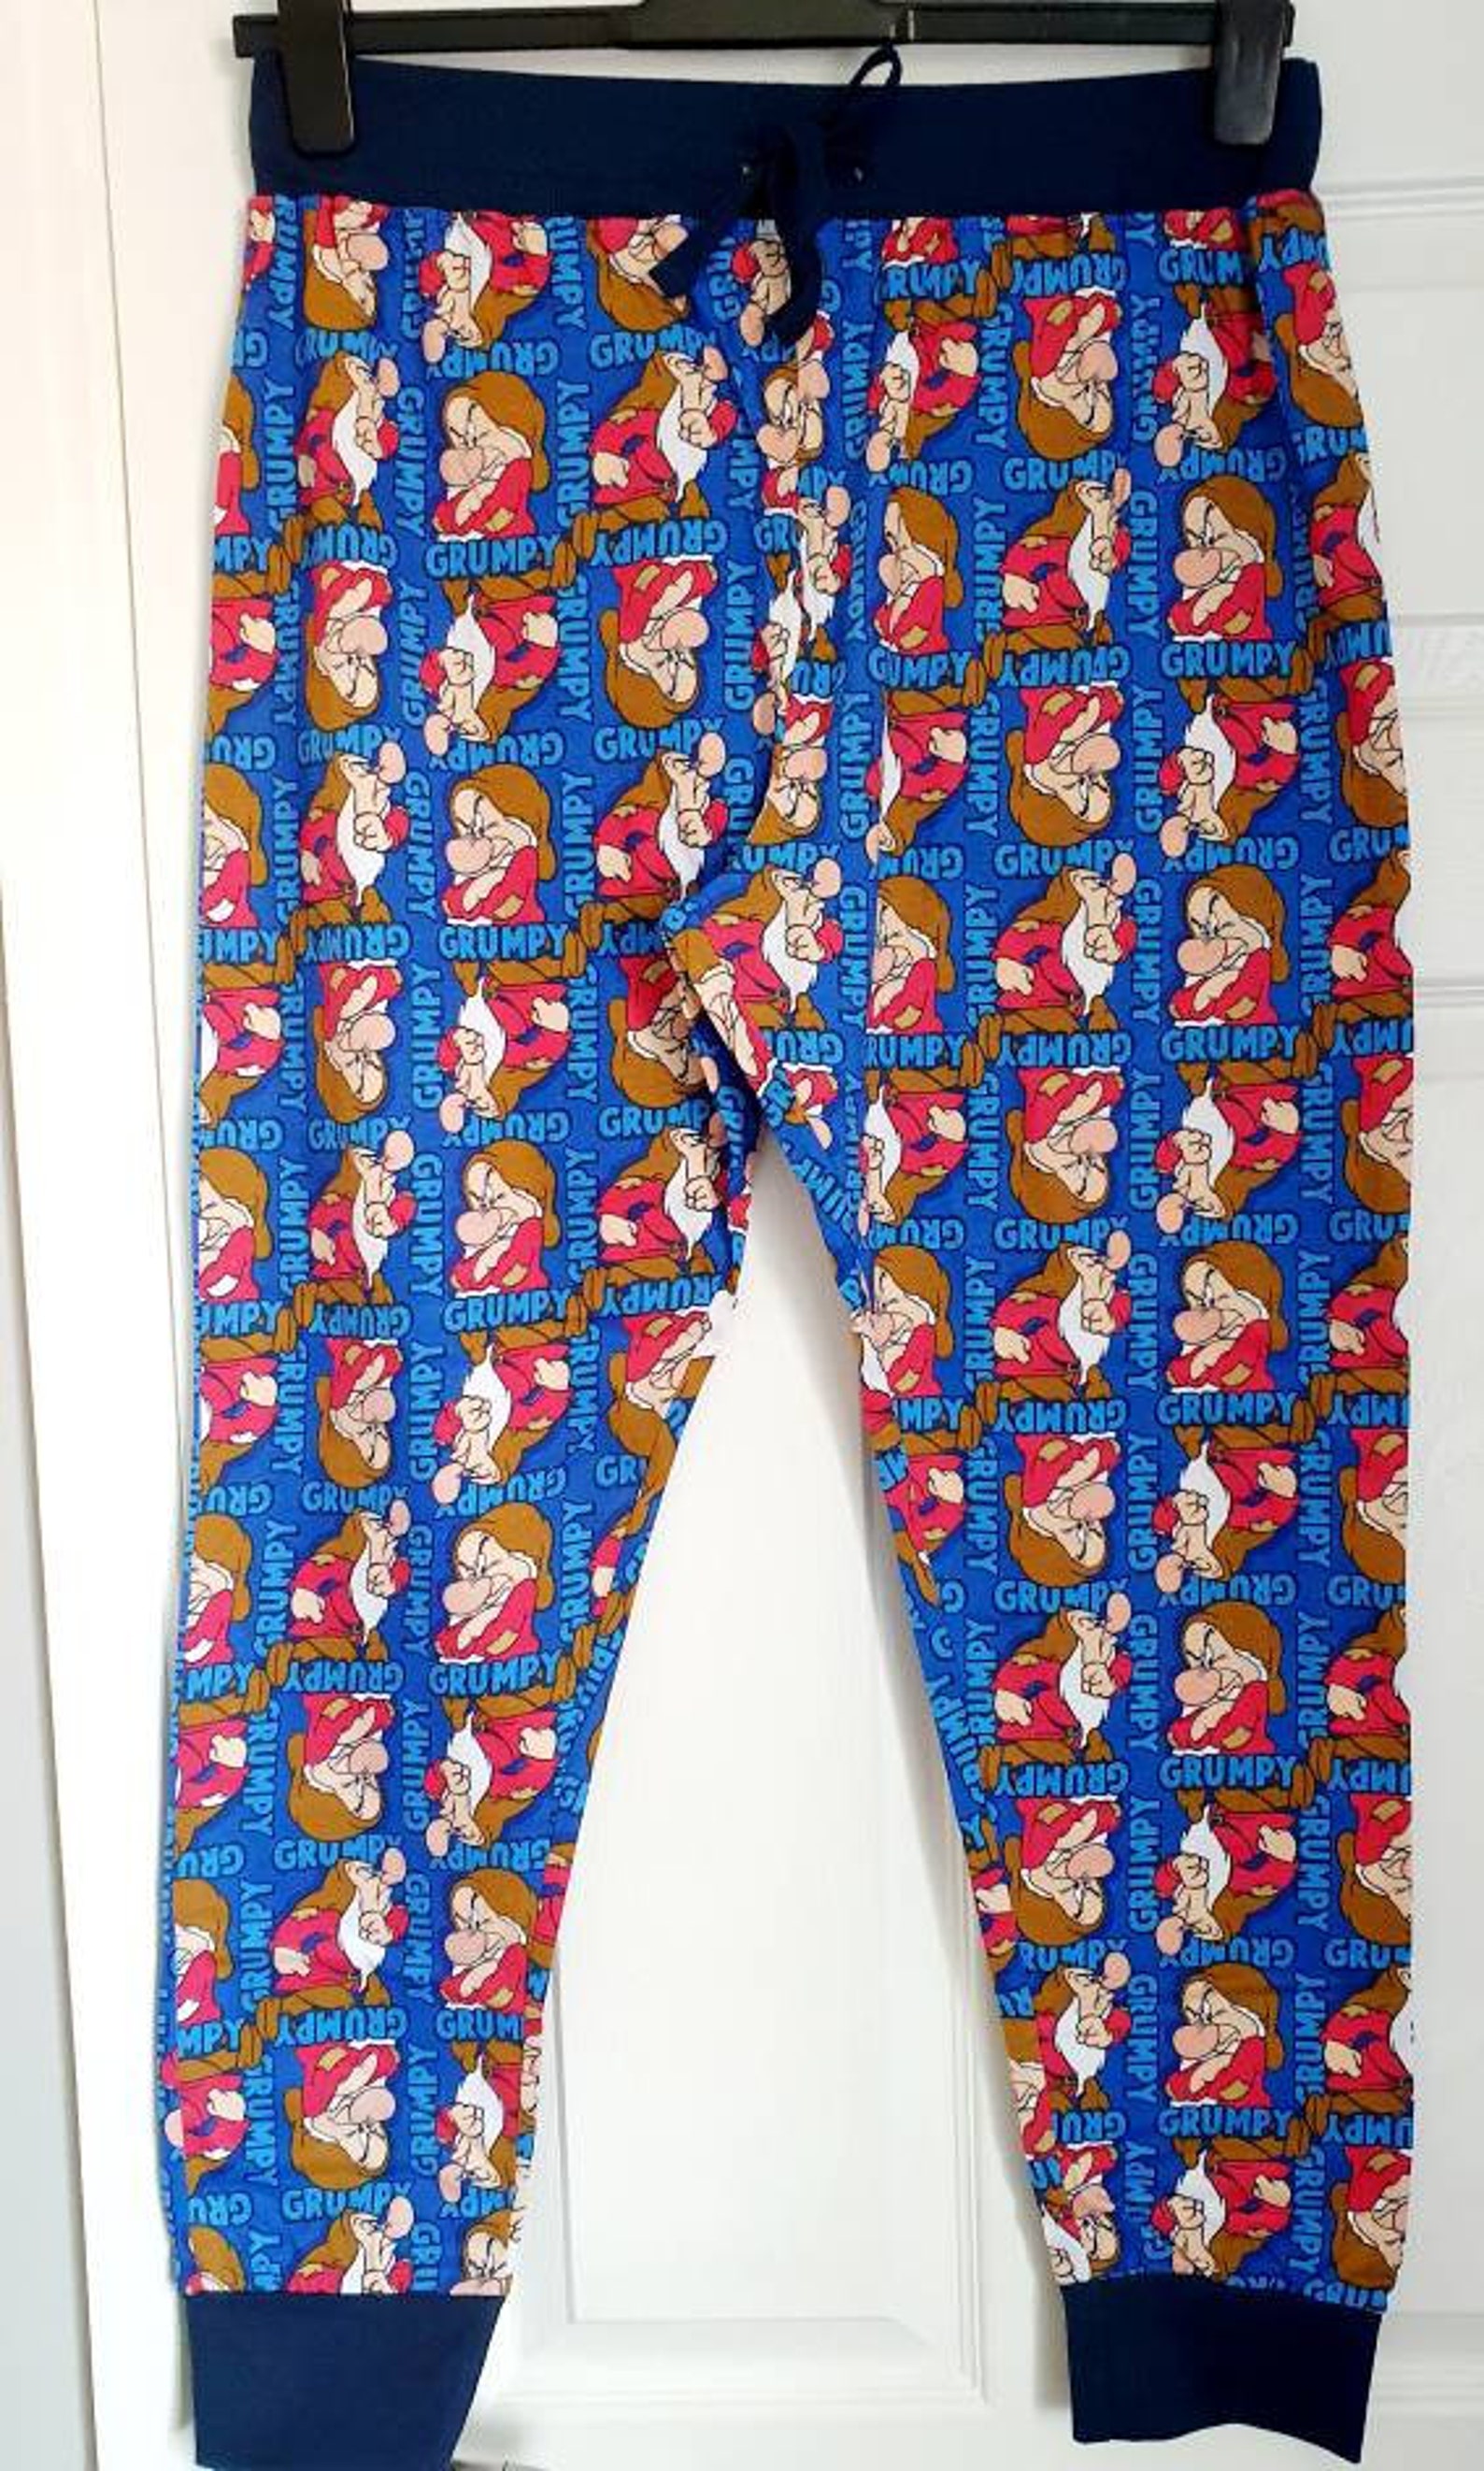 Brand New and Official Disney Men's Grumpy Lounge pants | Etsy